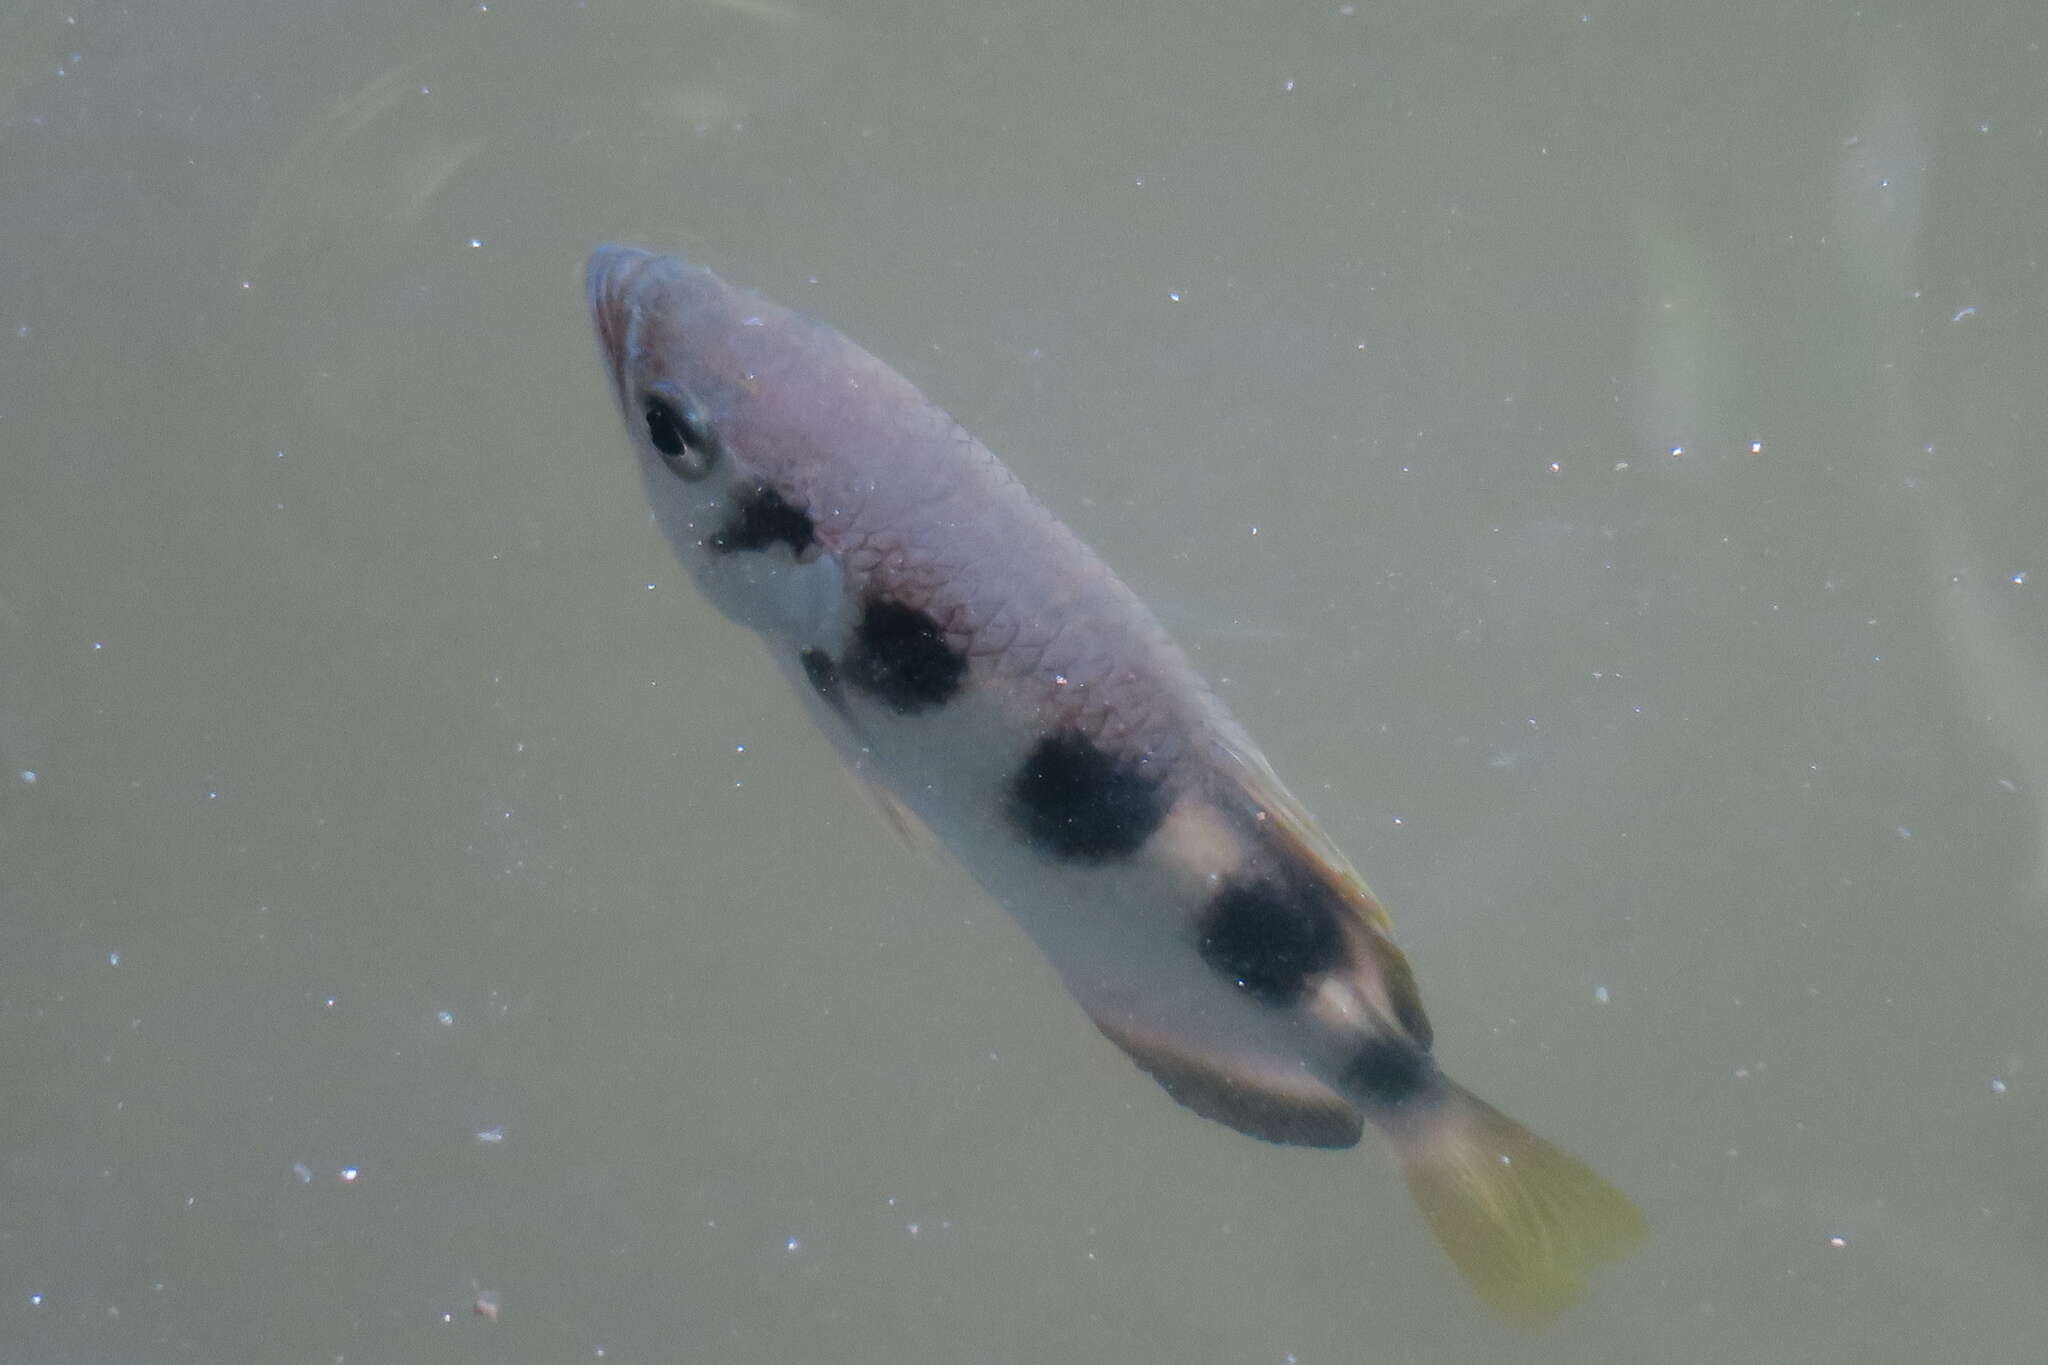 Image of archerfishes